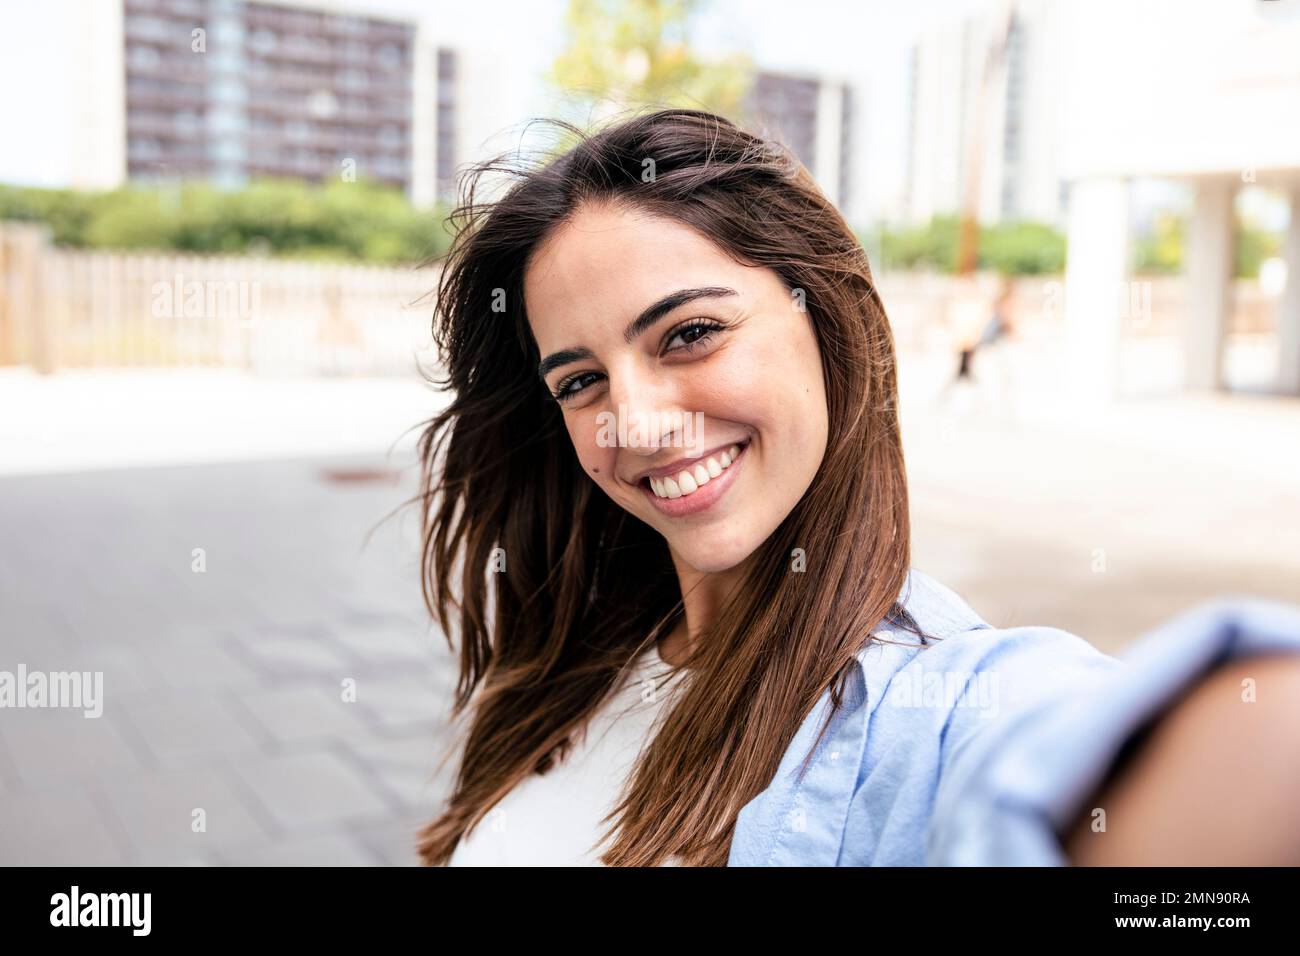 Selfie-portrait of pretty girl in the city. Portarit of happy young beautiful woman doing a selfie photo on the camera.  Stock Photo